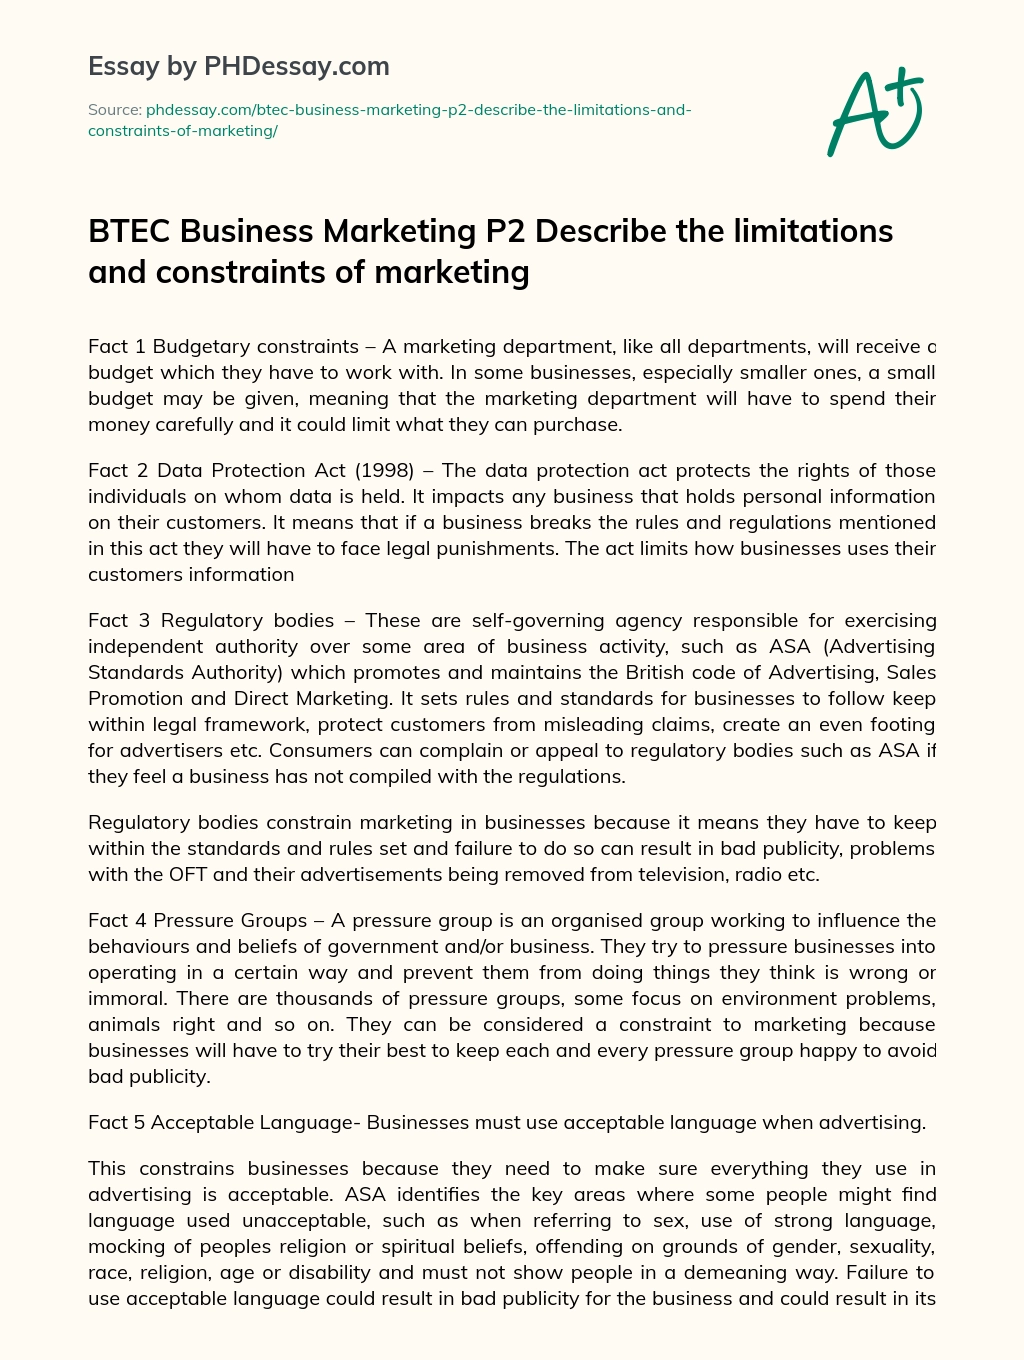 BTEC Business Marketing P2 Describe the limitations and constraints of marketing essay